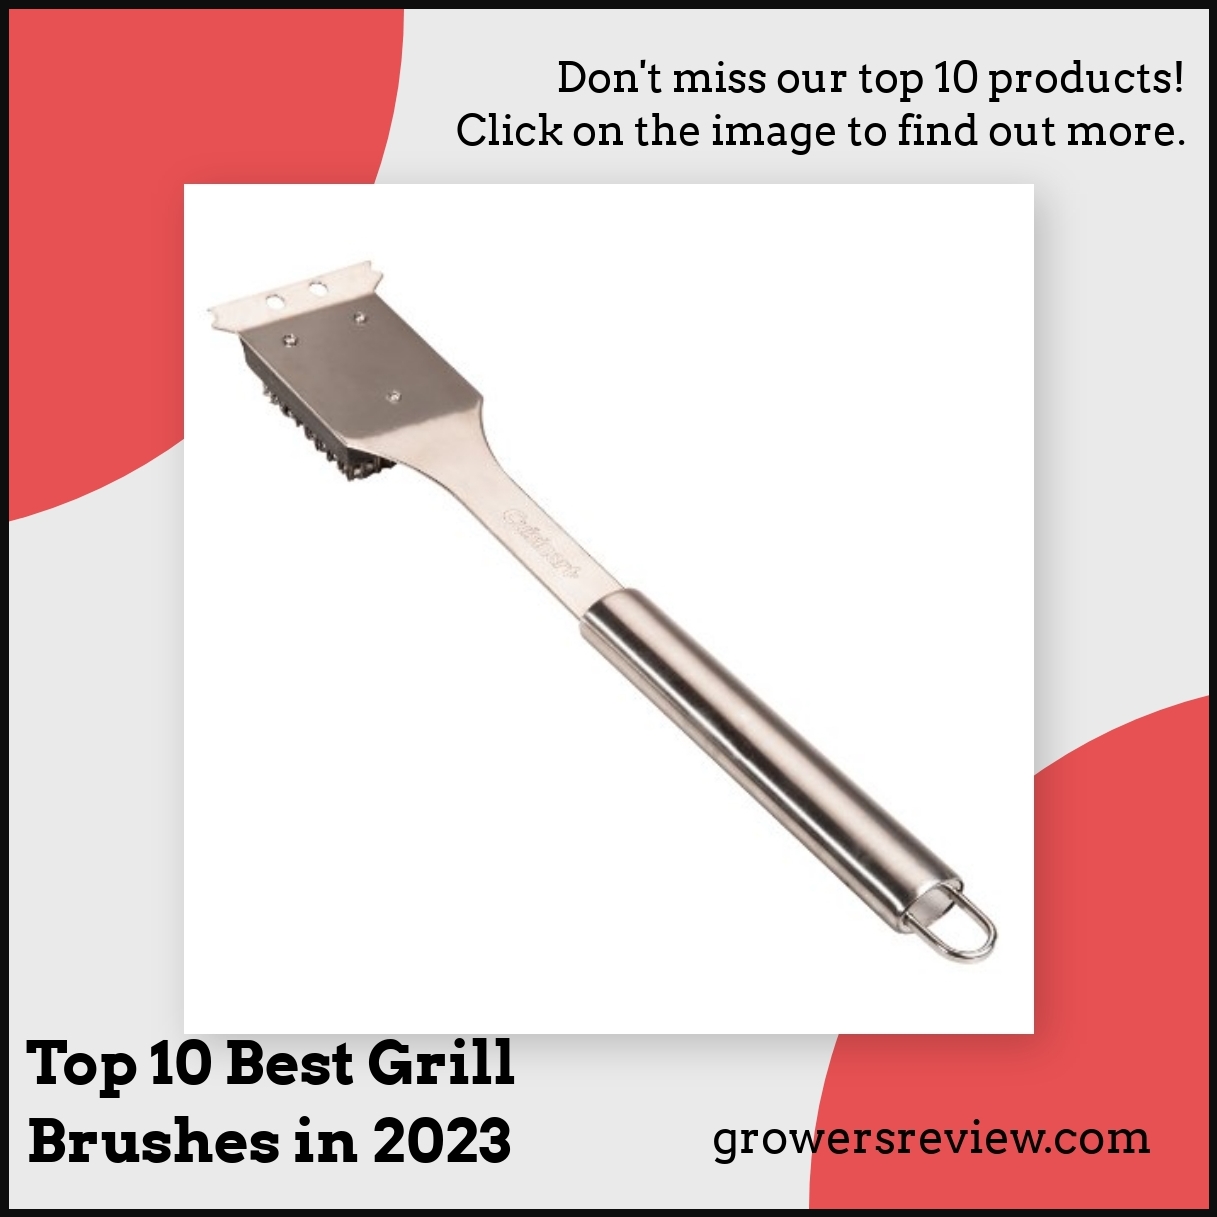 Top 10 Best Grill Brushes in 2023